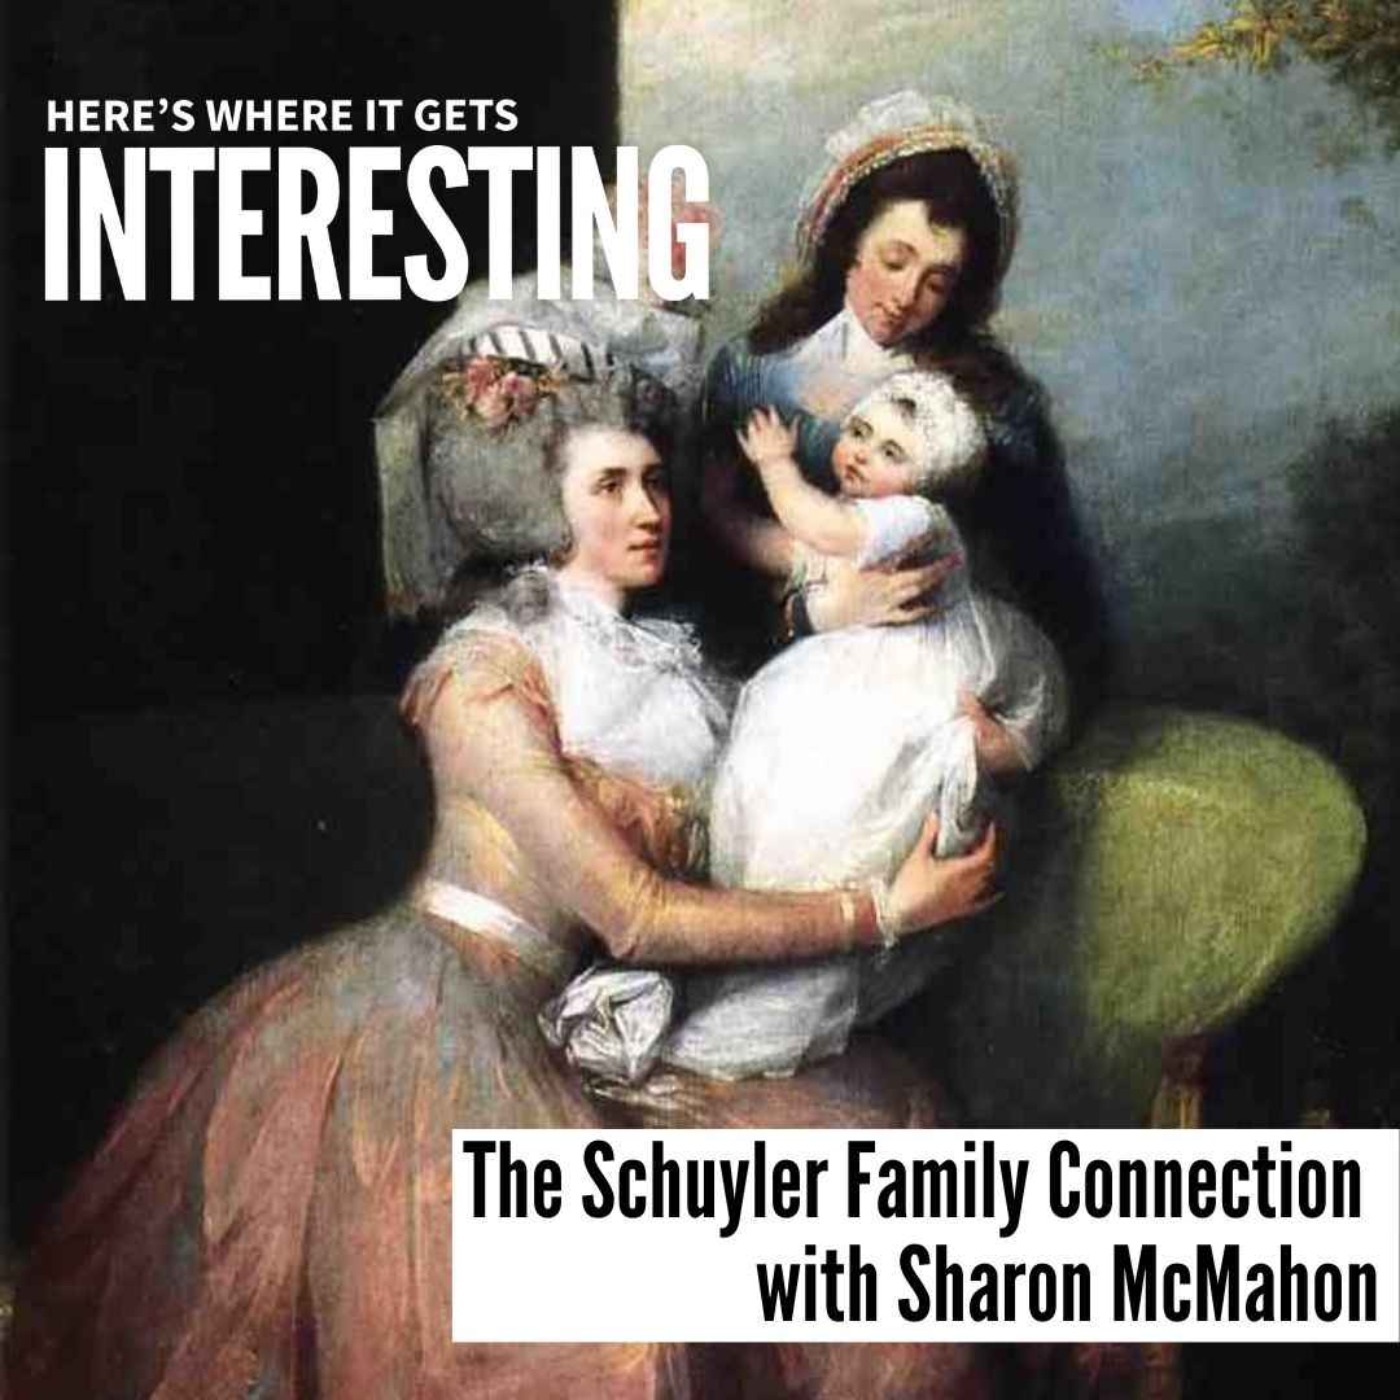 New York: The Schuyler Family Connection with Sharon McMahon